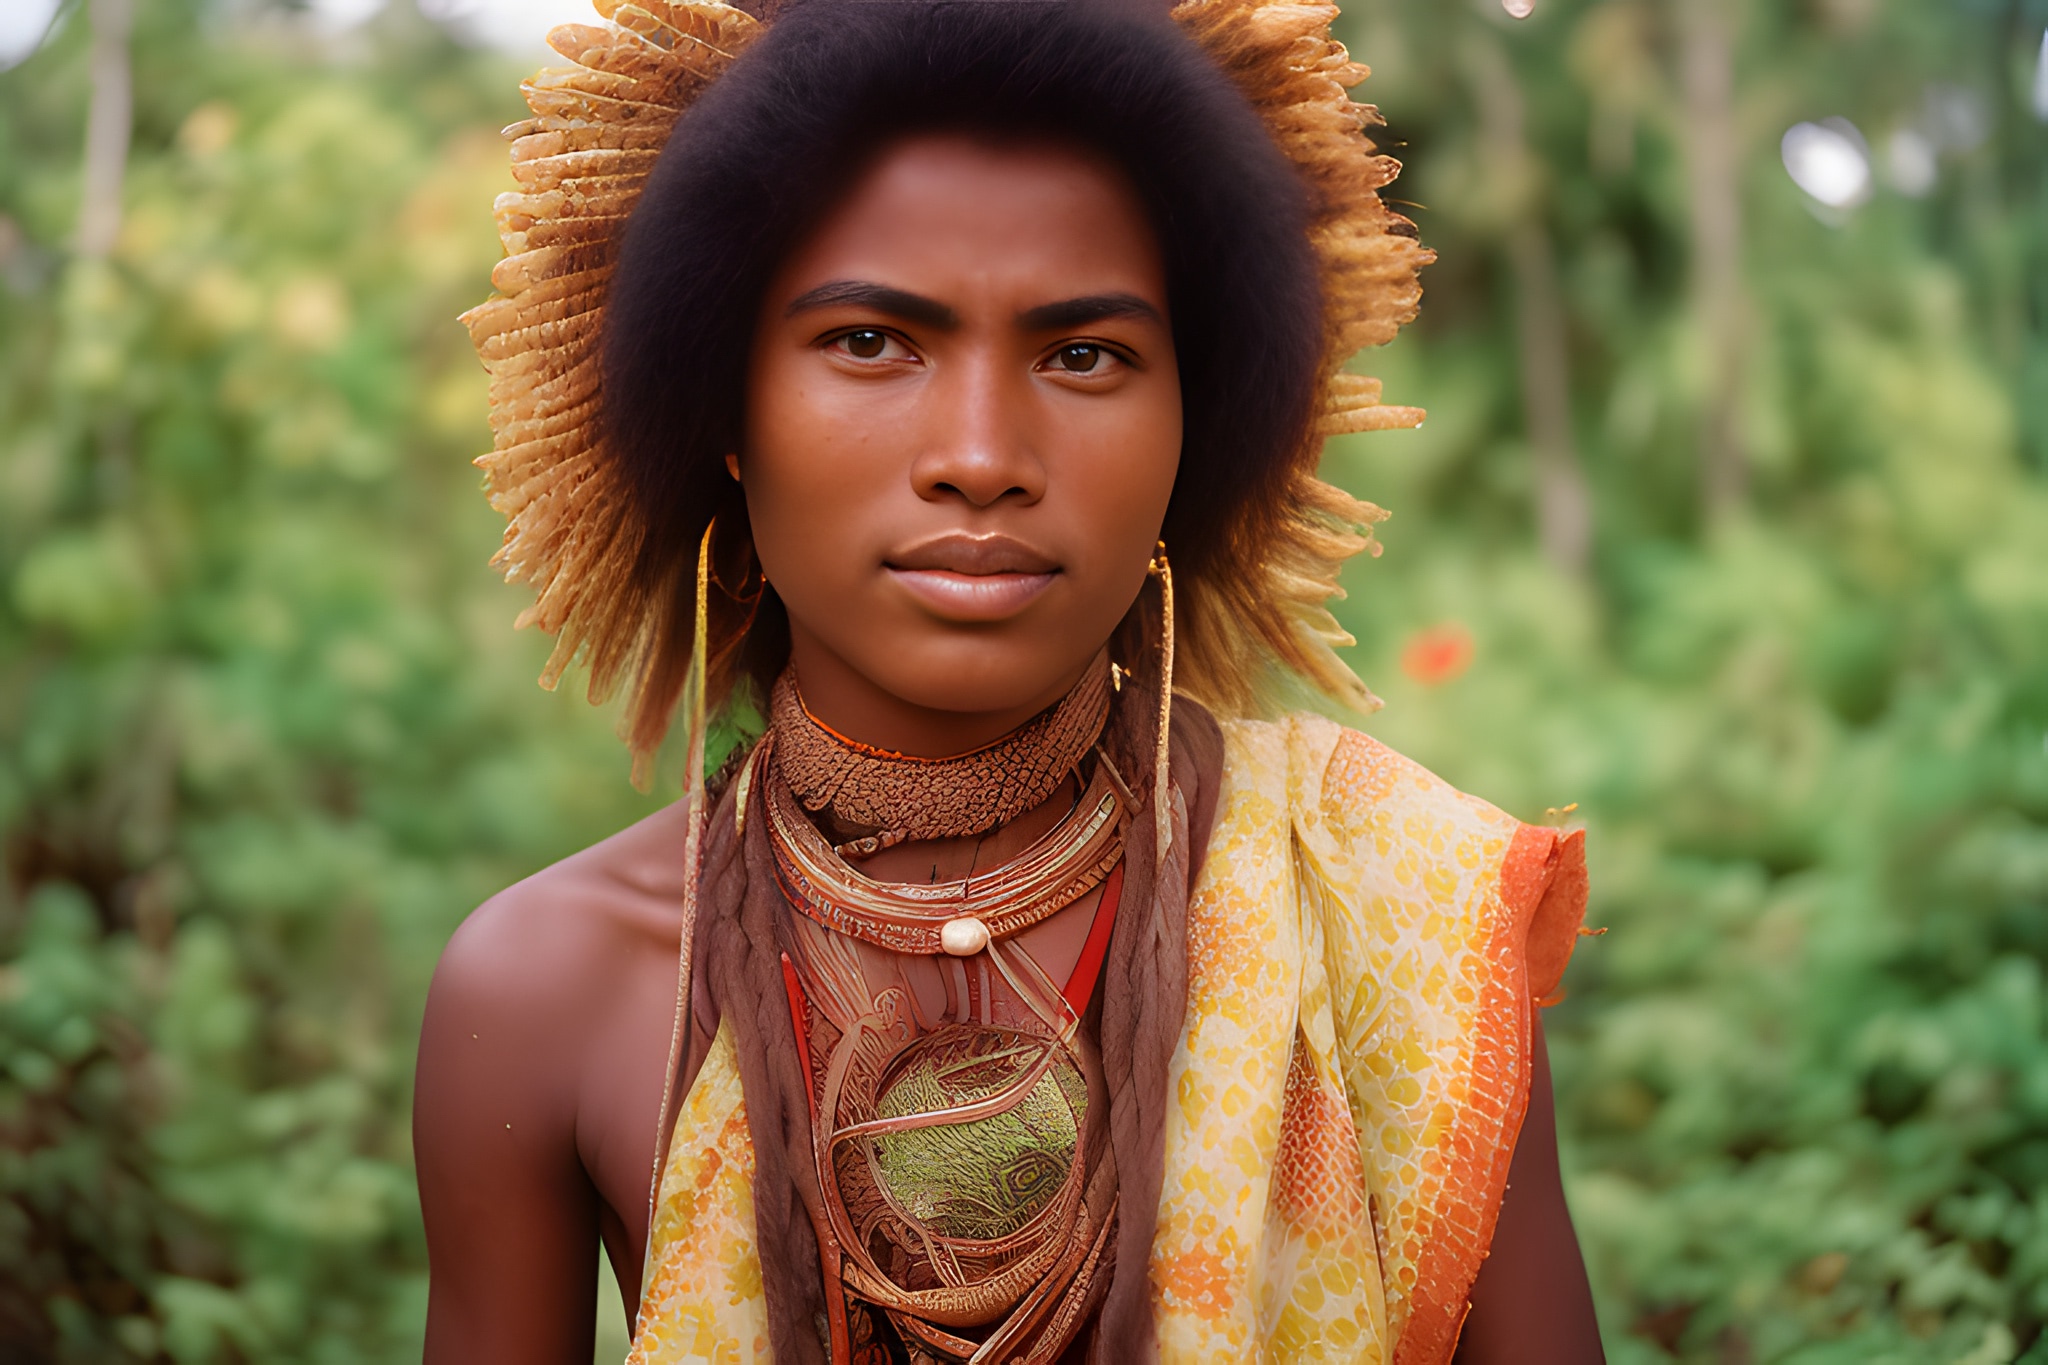 Portrait-of-a-one-person-Tribe-face-focused-ecpt